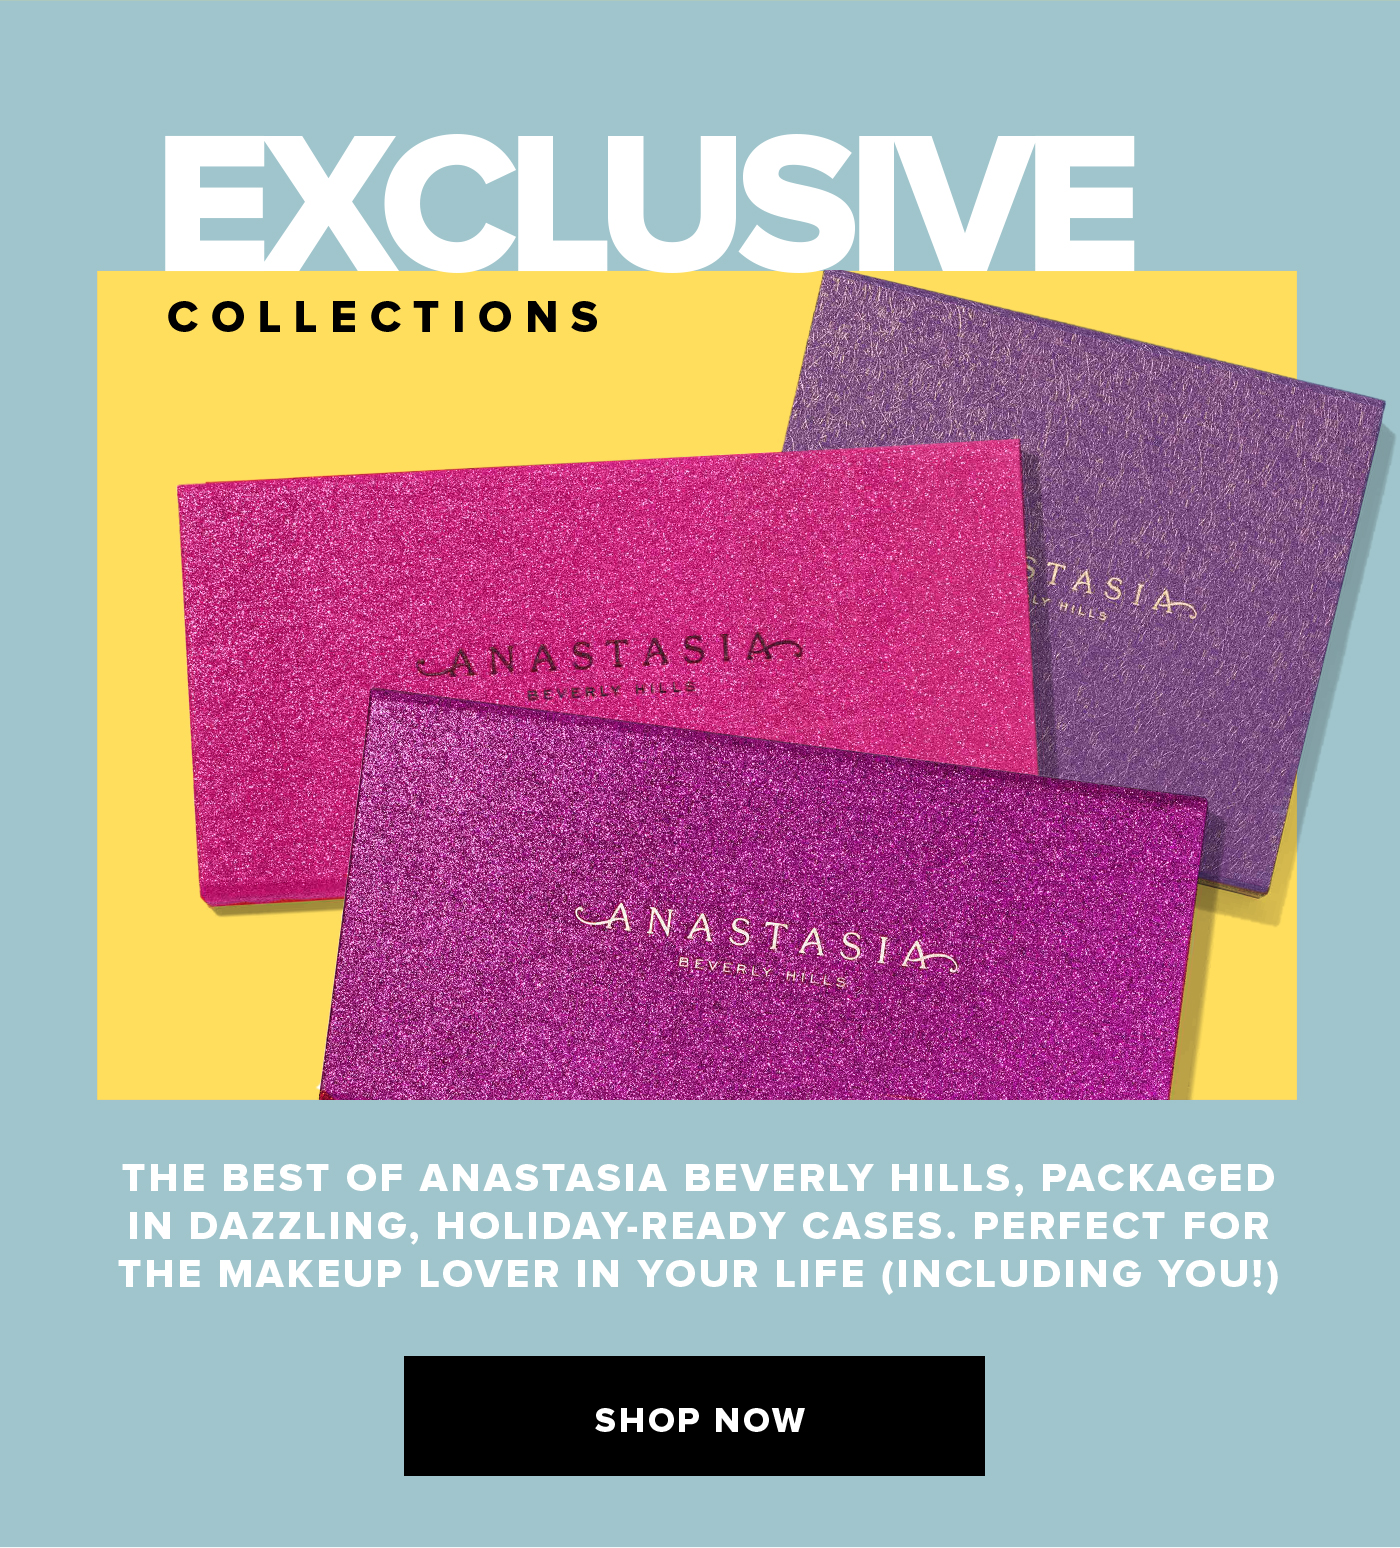 EXCLUSIVE COLLECTIONS THE BEST OF ANASTASIA BEVERLY HILLS, PACKAGED IN DAZZLING, HOLIDAY-READY CASES. PERFECT FOR  THE MAKEUP LOVER IN YOUR LIFE (INCLUDING YOU!) SHOP NOW